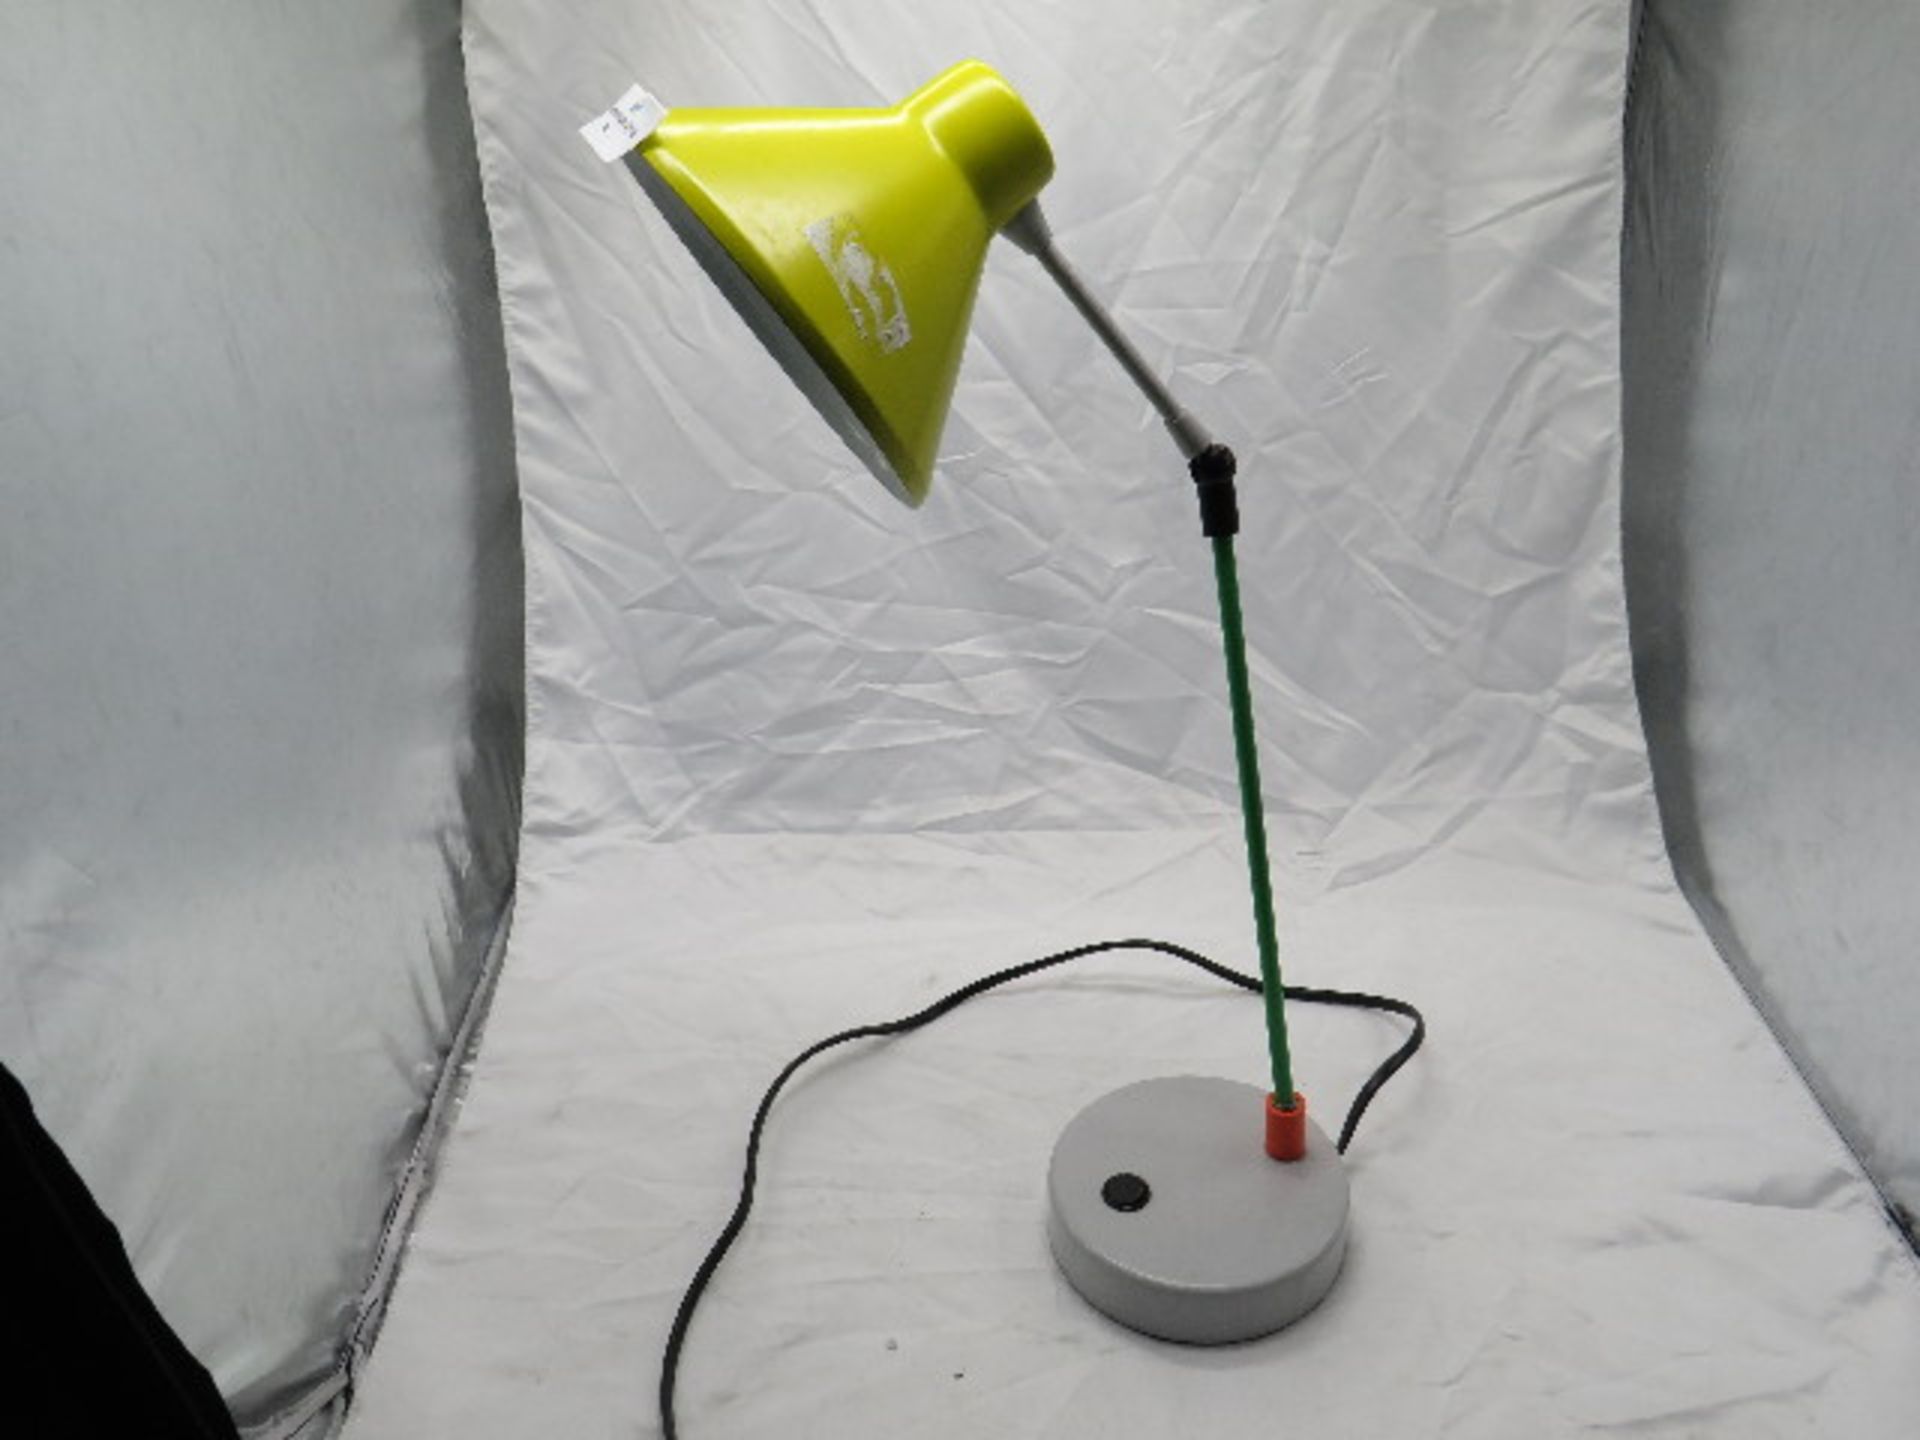 Multi-Coloured Adjustable Desk Lamp - ( See Image For Design ) - May Contain Marks Or Unseen